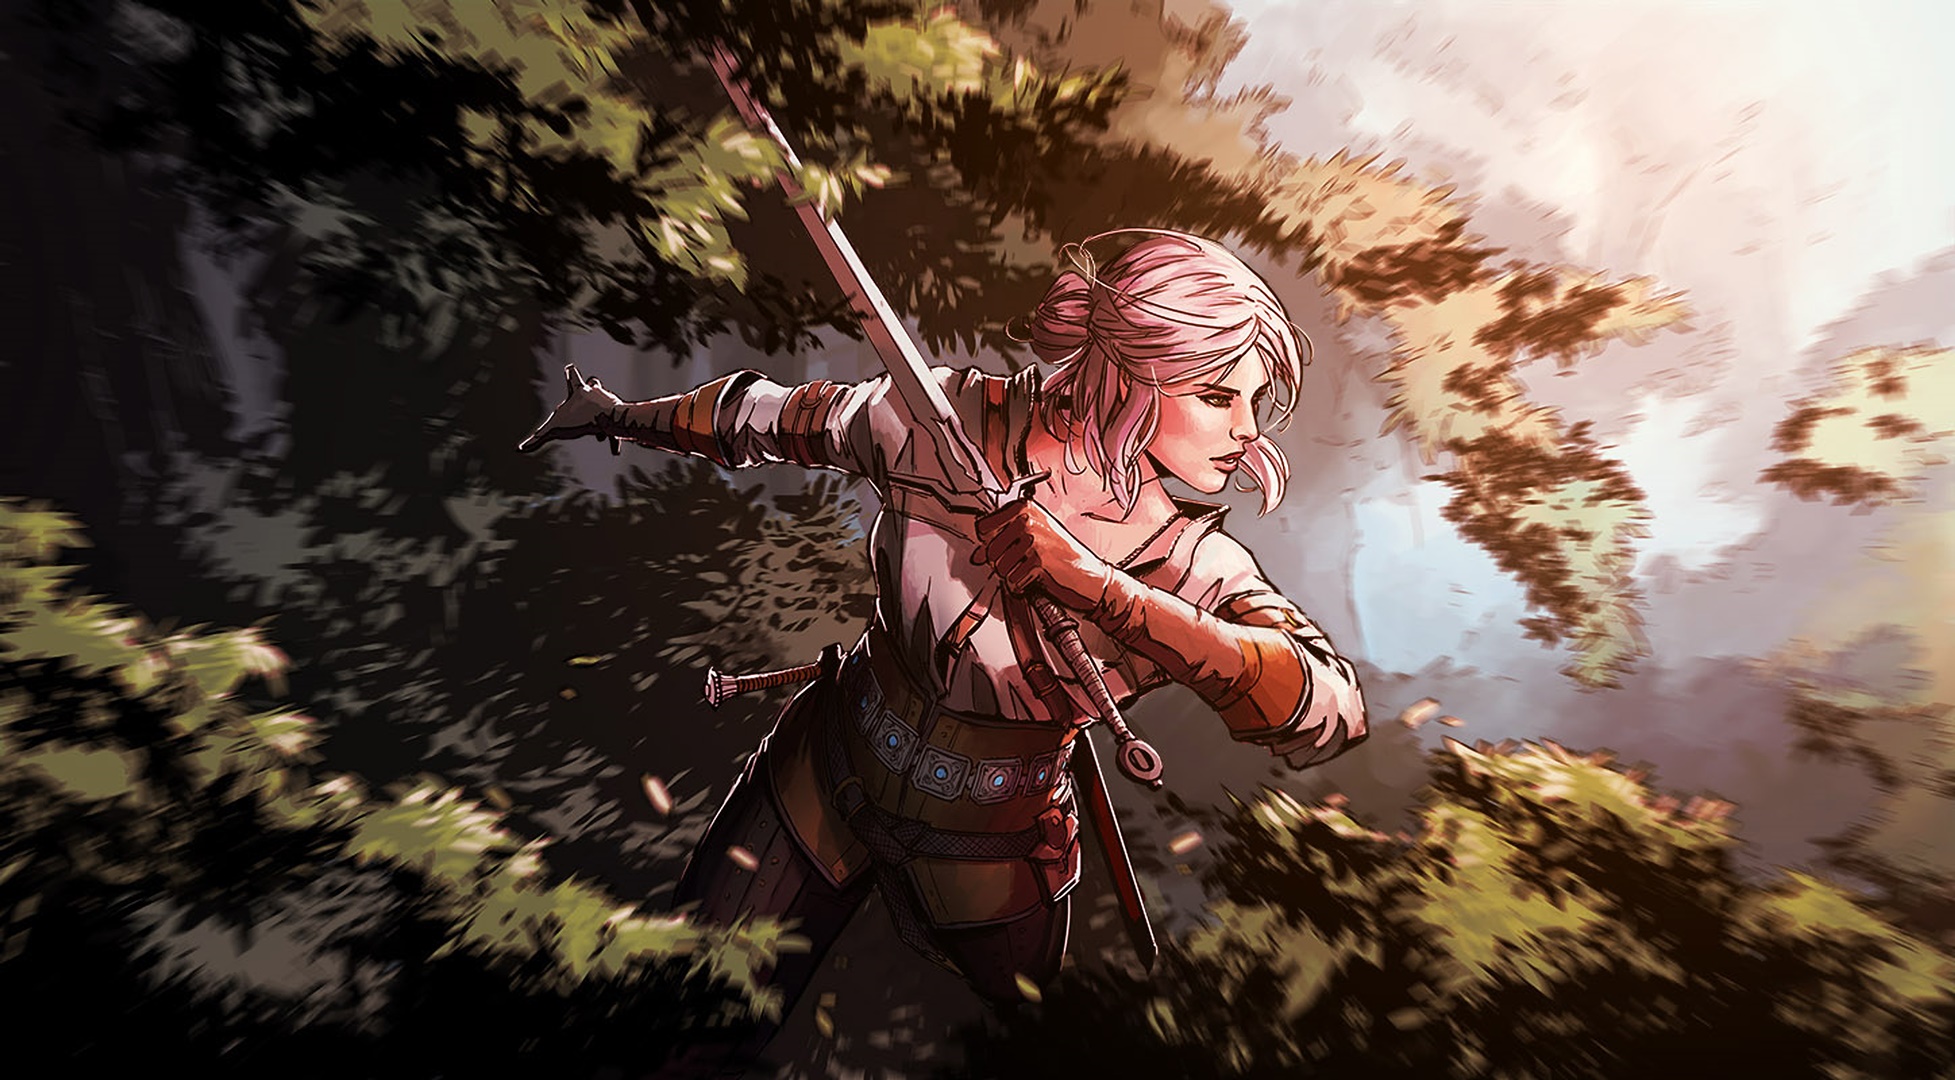 General 1955x1080 artwork fan art Cirilla Fiona Elen Riannon The Witcher The Witcher 3: Wild Hunt video games video game characters